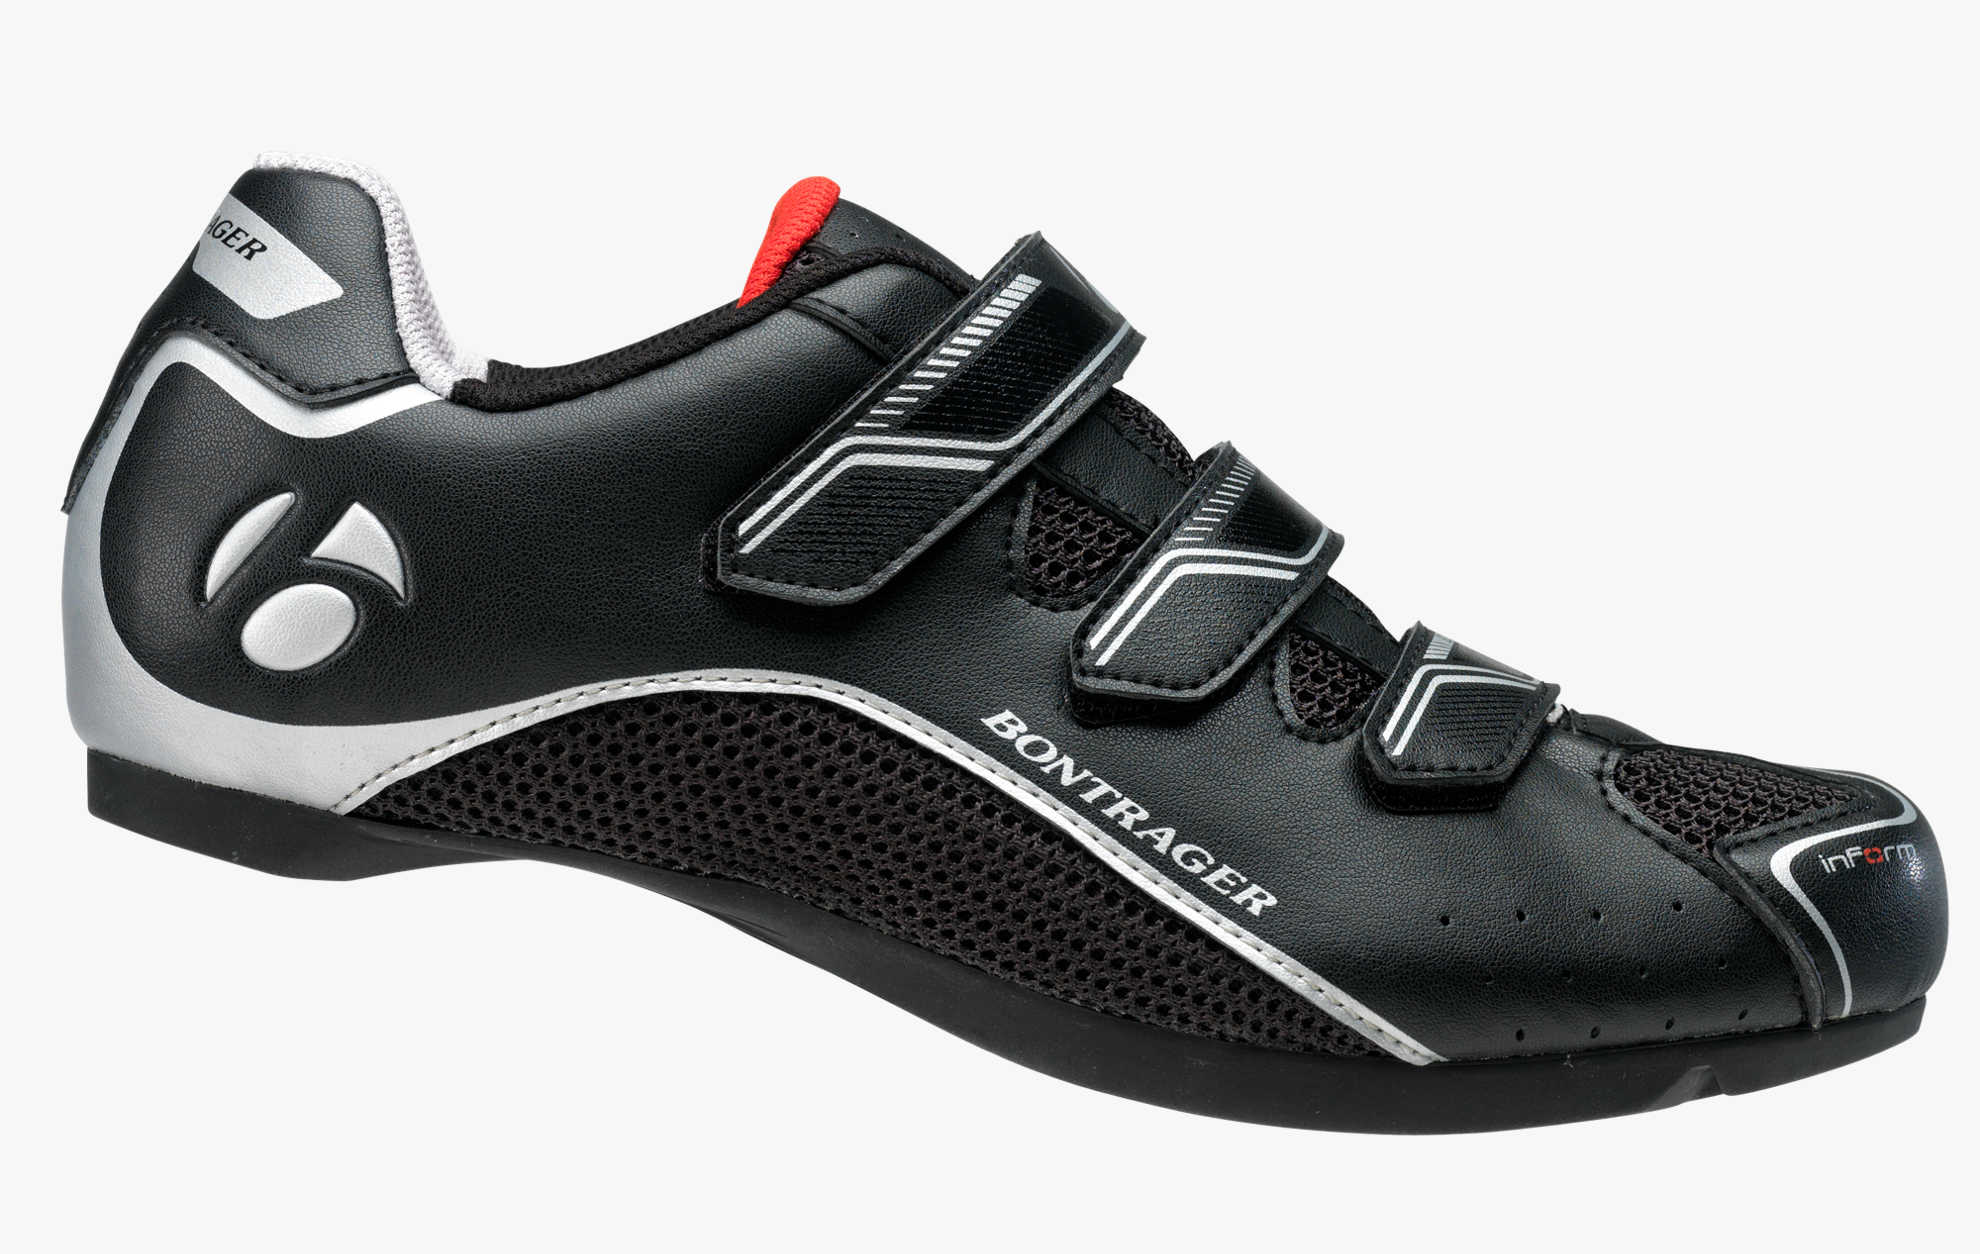 Bontrager Solstice Road Shoe | Cycling shoes | Cycling apparel ...